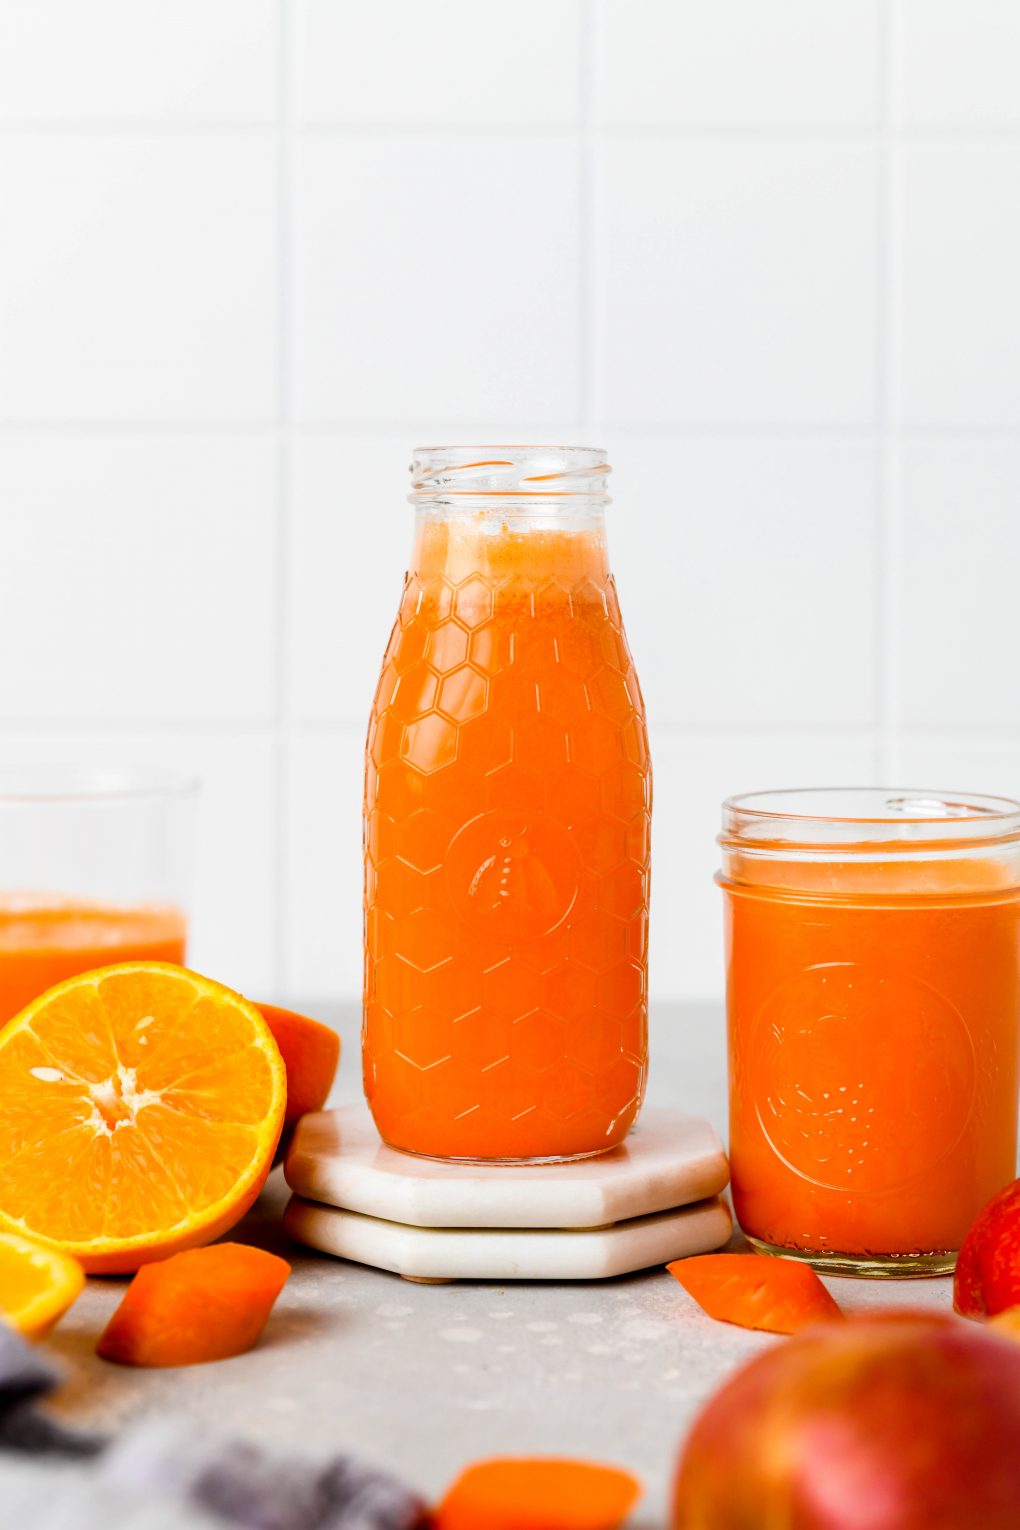 Straight on shot of a textured glass jar filled to the brim with bright orange carrot, apple, and orange juice with ginger. Next to some cut oranges, and carrot pieces, on a light colored background.